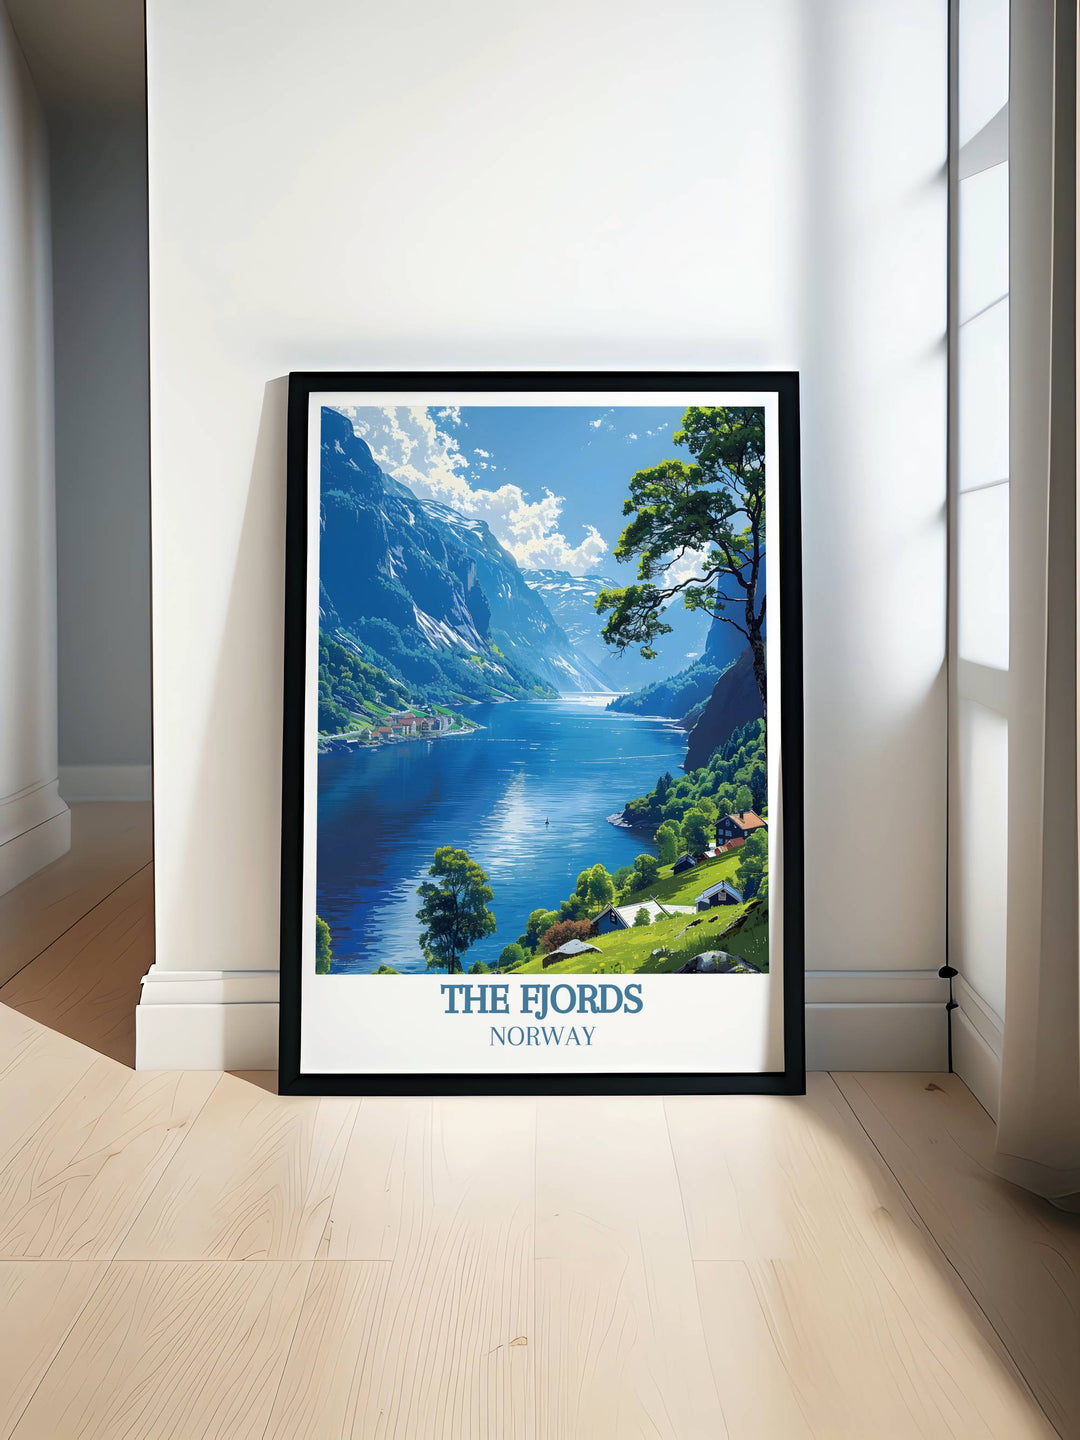 Nærøyfjord Fjord wall art capturing the majestic beauty of Norways iconic fjord, featuring narrow, steep sided cliffs and tranquil waters, perfect for adding a serene focal point to any room.